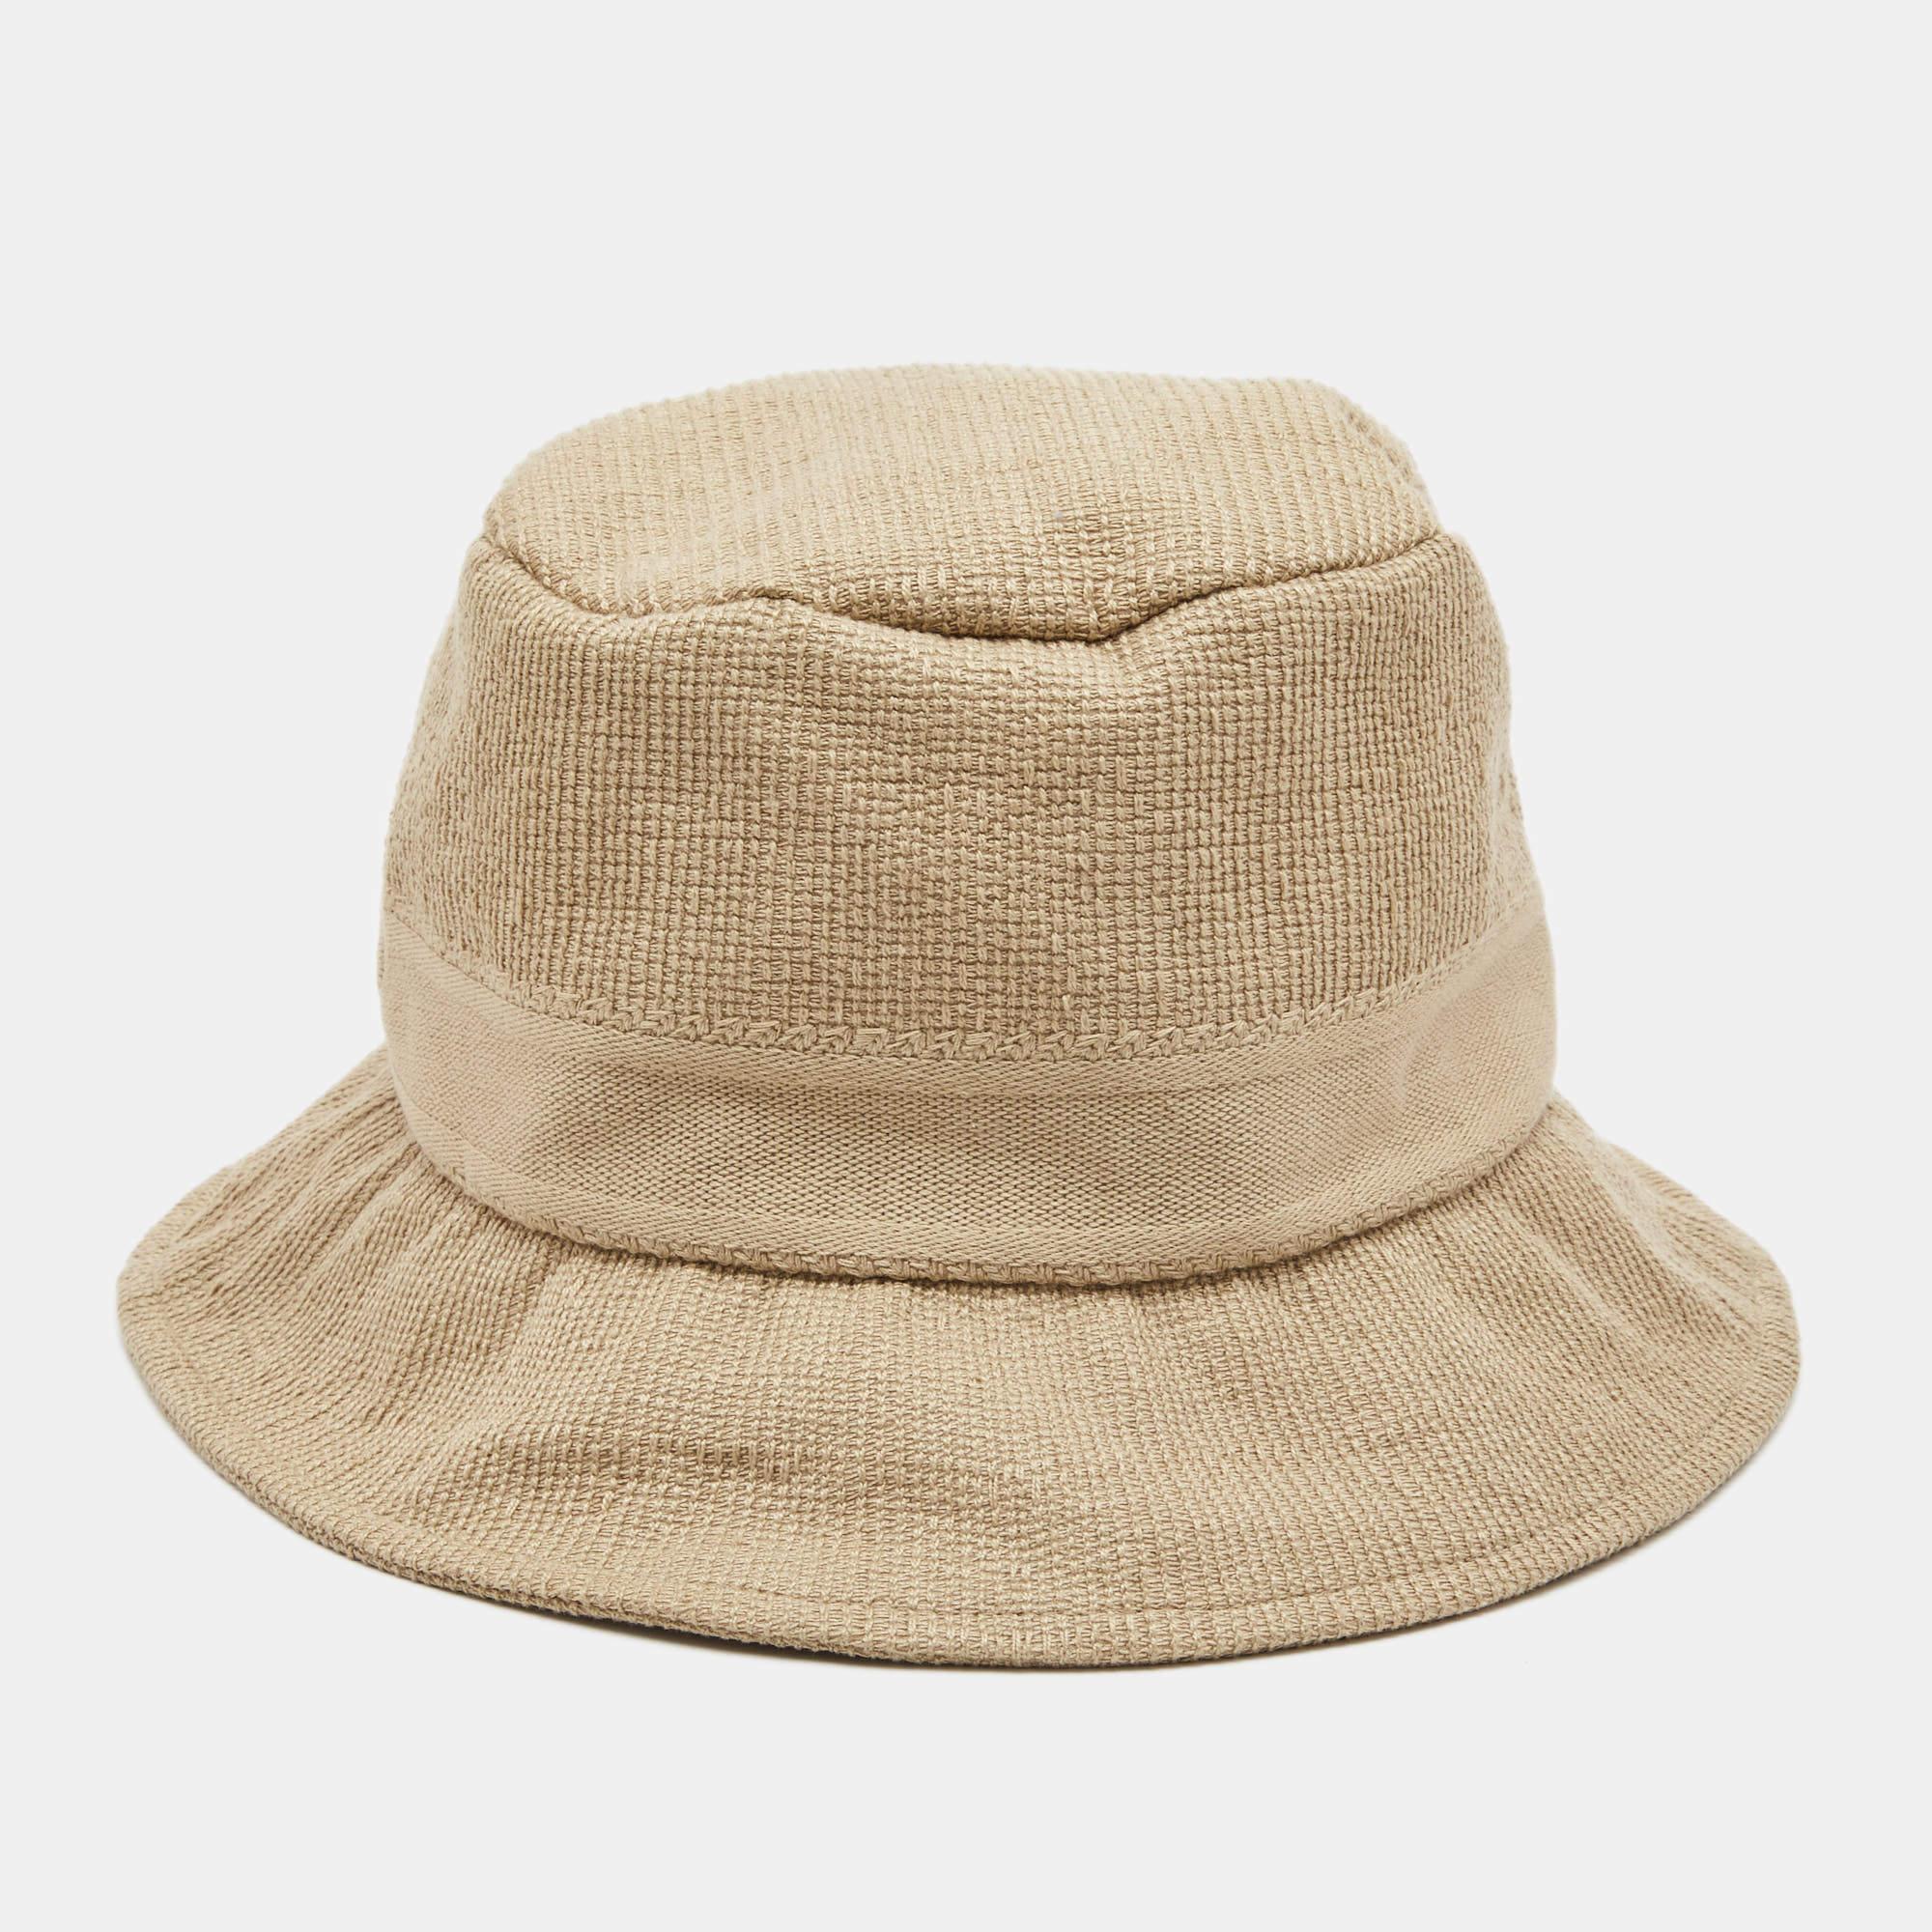 Head out looking totally trendy and chic with this bucket hat from the House of Dior. It has been made using beige cotton, thus making it the perfect summer accessory. The brand logo is placed on the front.

